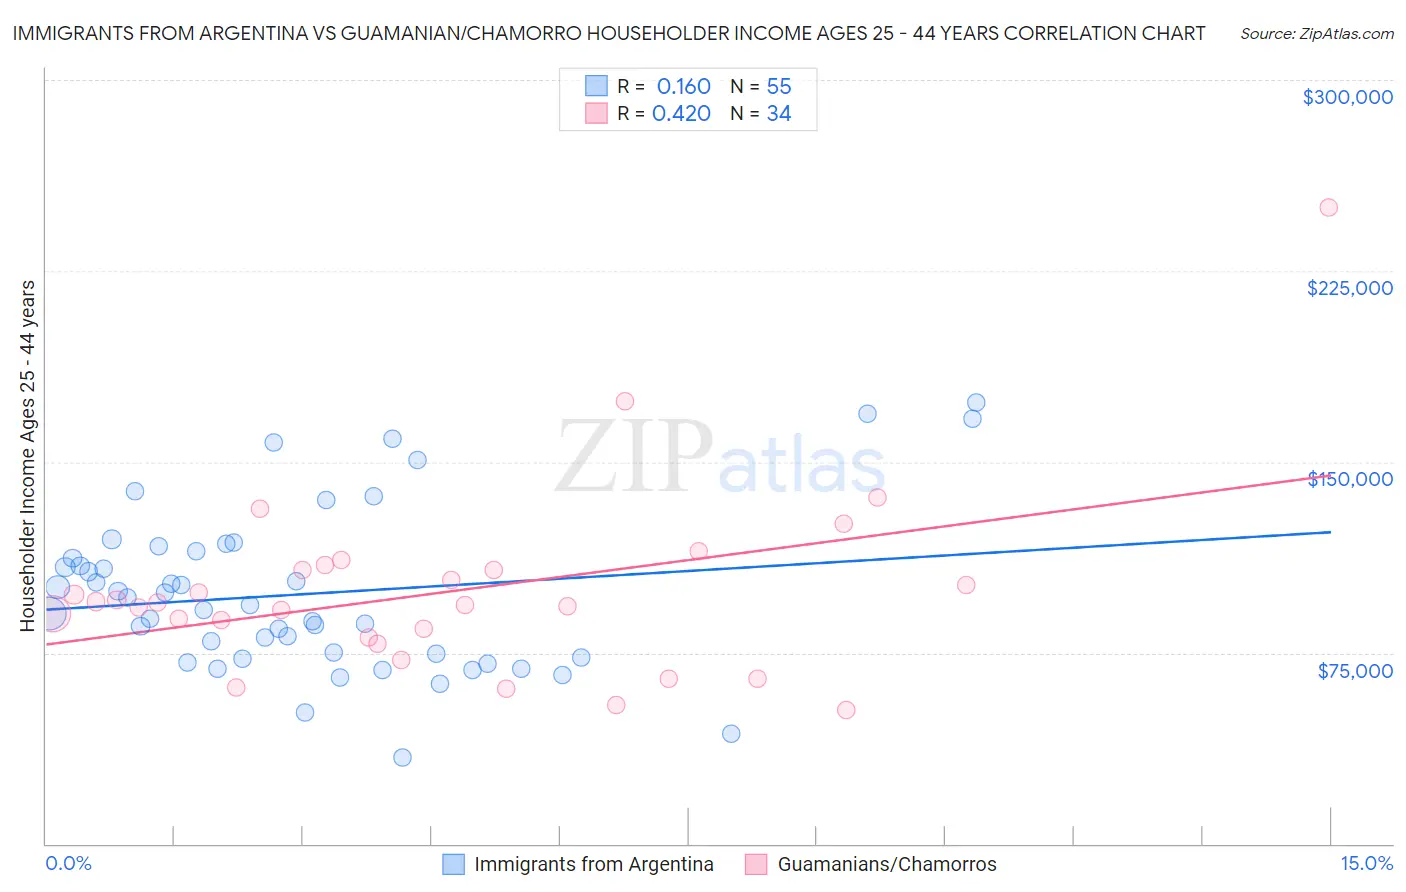 Immigrants from Argentina vs Guamanian/Chamorro Householder Income Ages 25 - 44 years